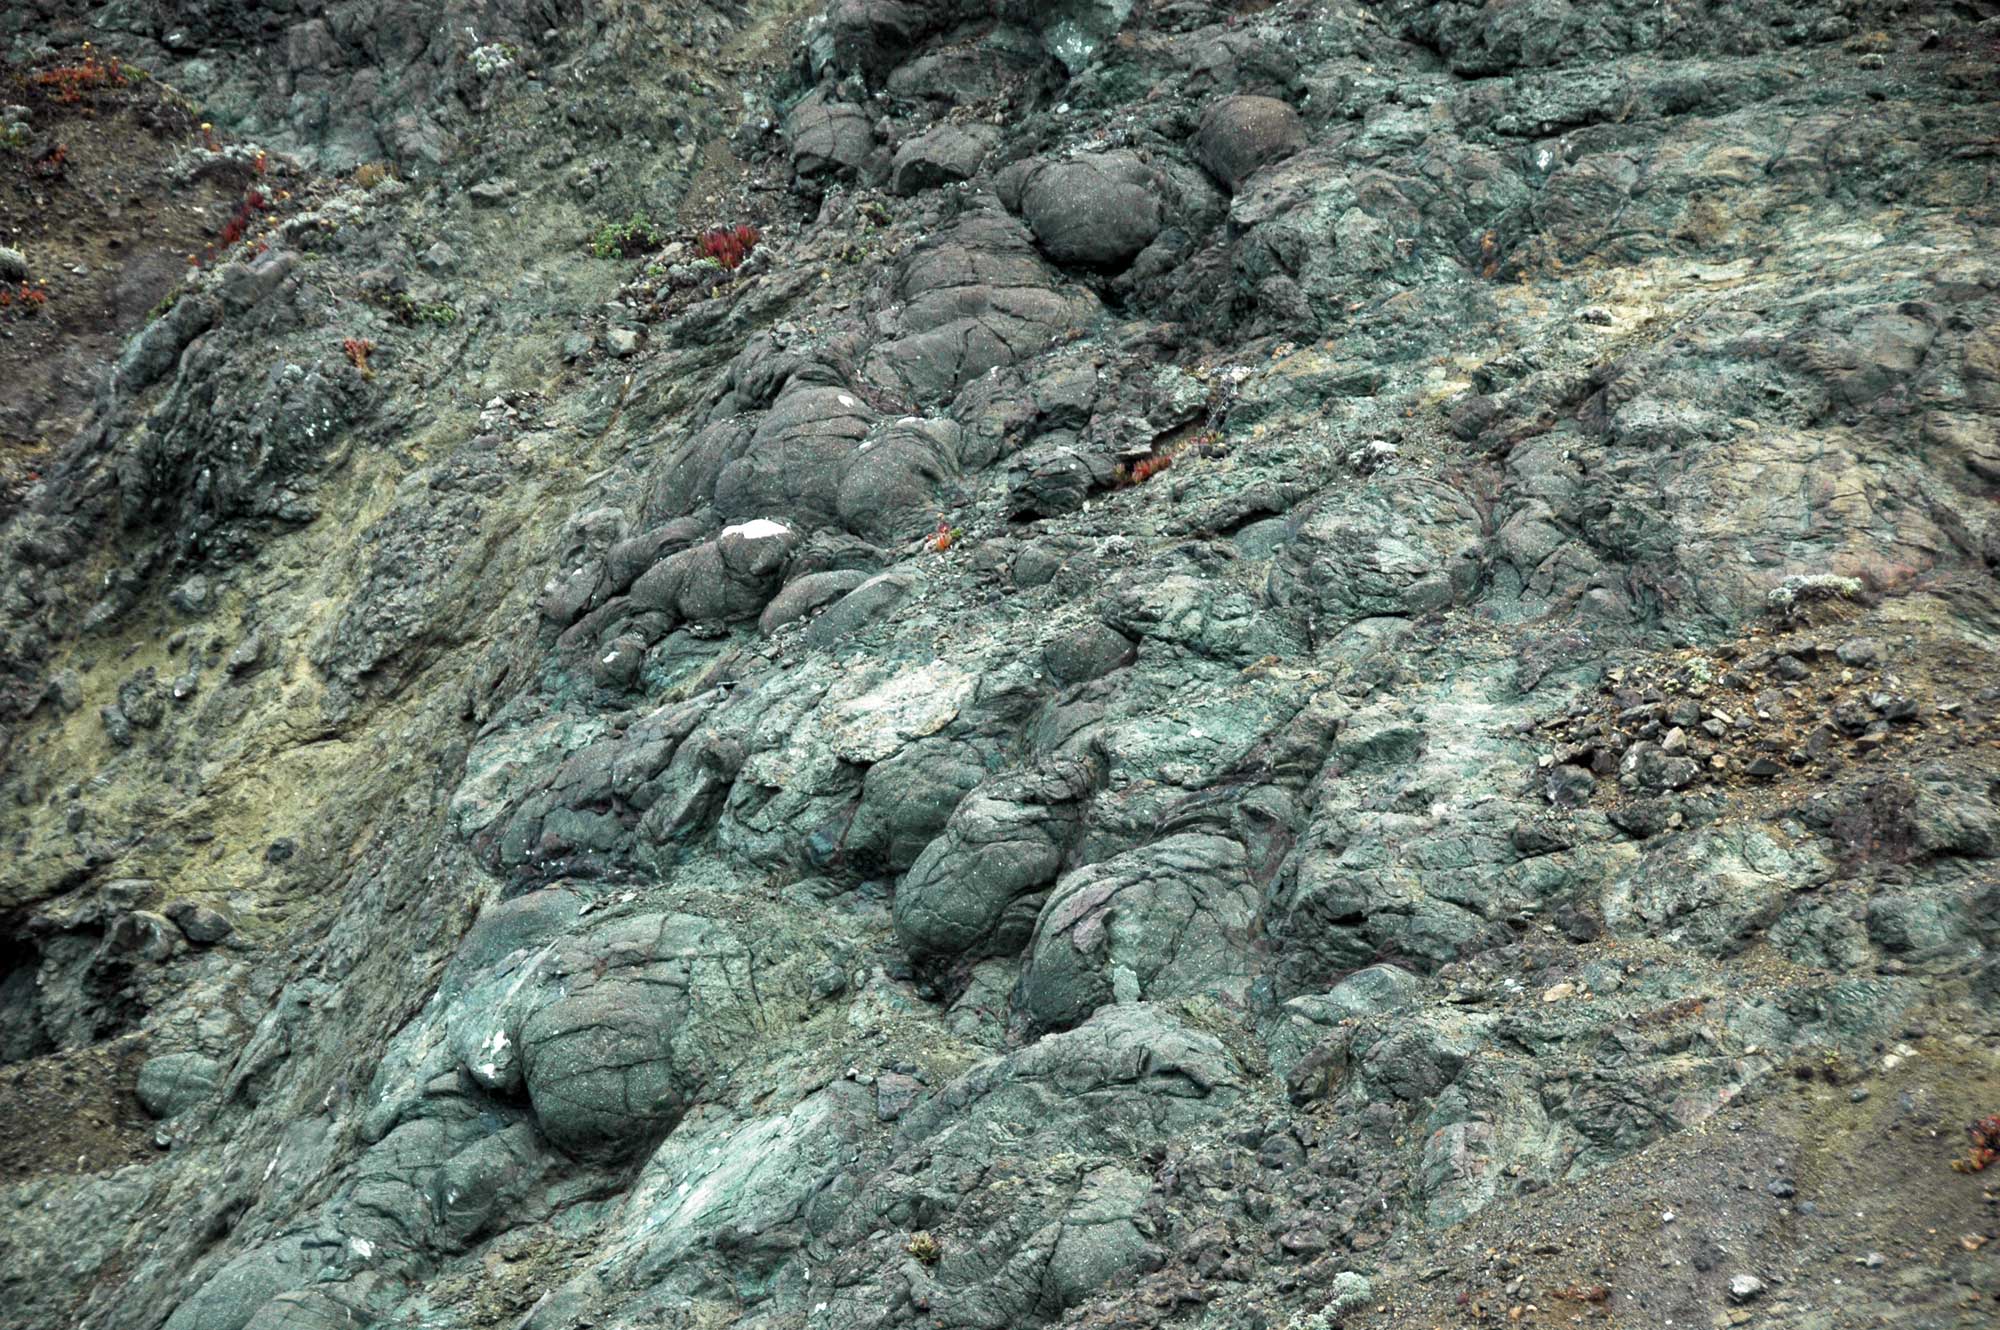 Photograph of pillow basalts in California. The rock is greenish with clear rounded "pillows" indicating its origin on the ocean floor.